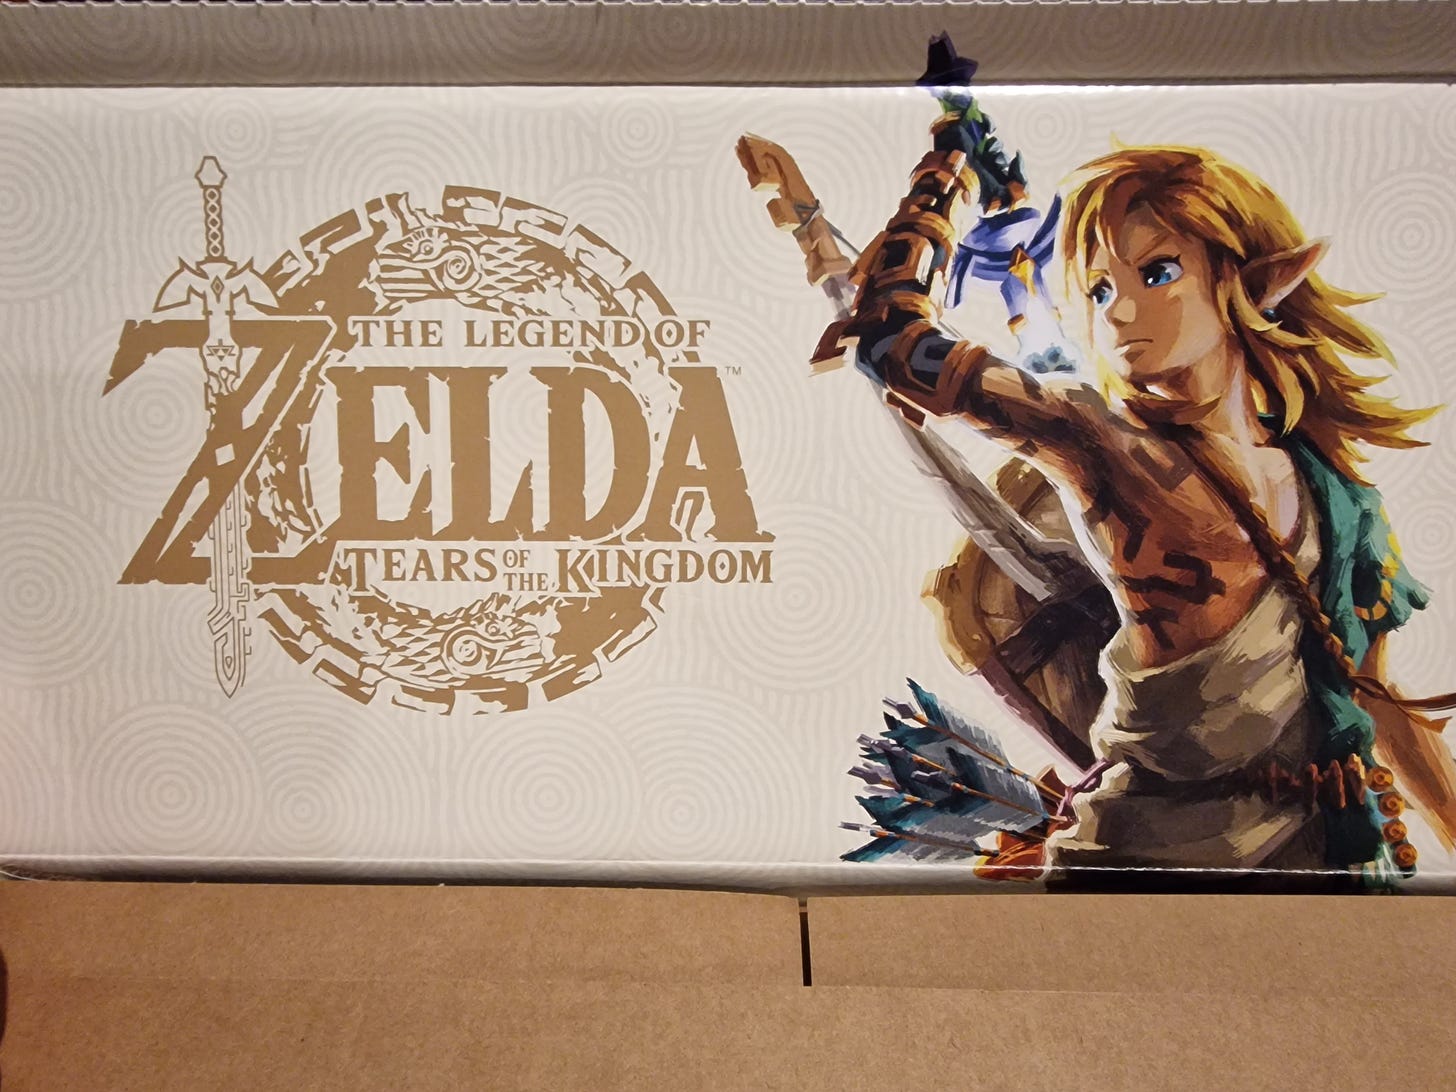 Image of Link posing with the Master Sword and the white and gold logo of the game